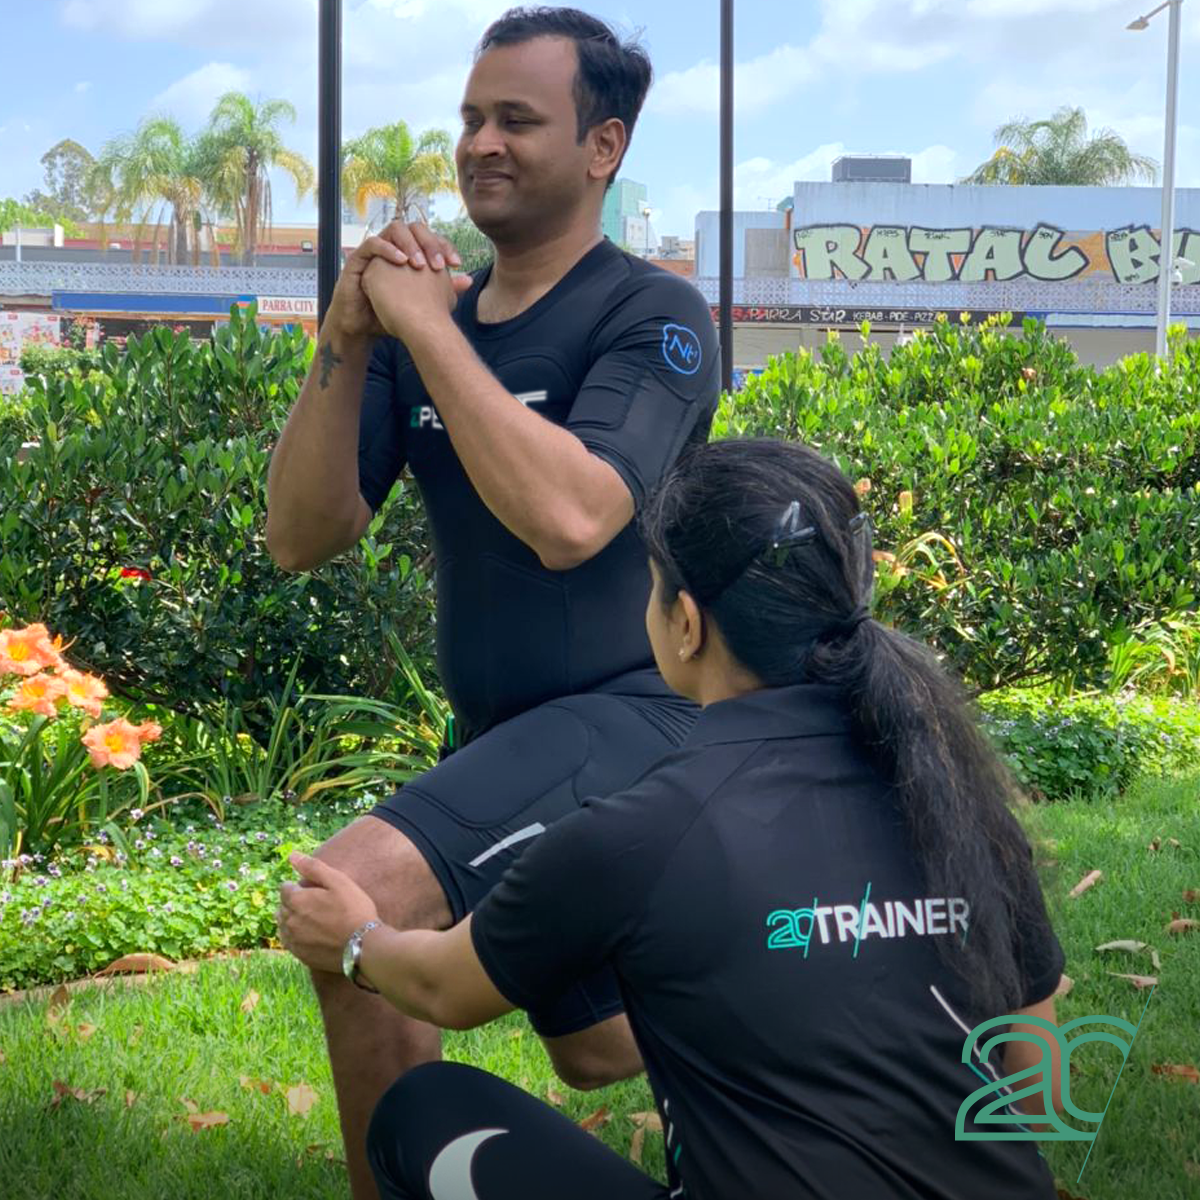 Man Exercising Split Squats with a Personal trainer using 20PerFit's Mobile EMS technology